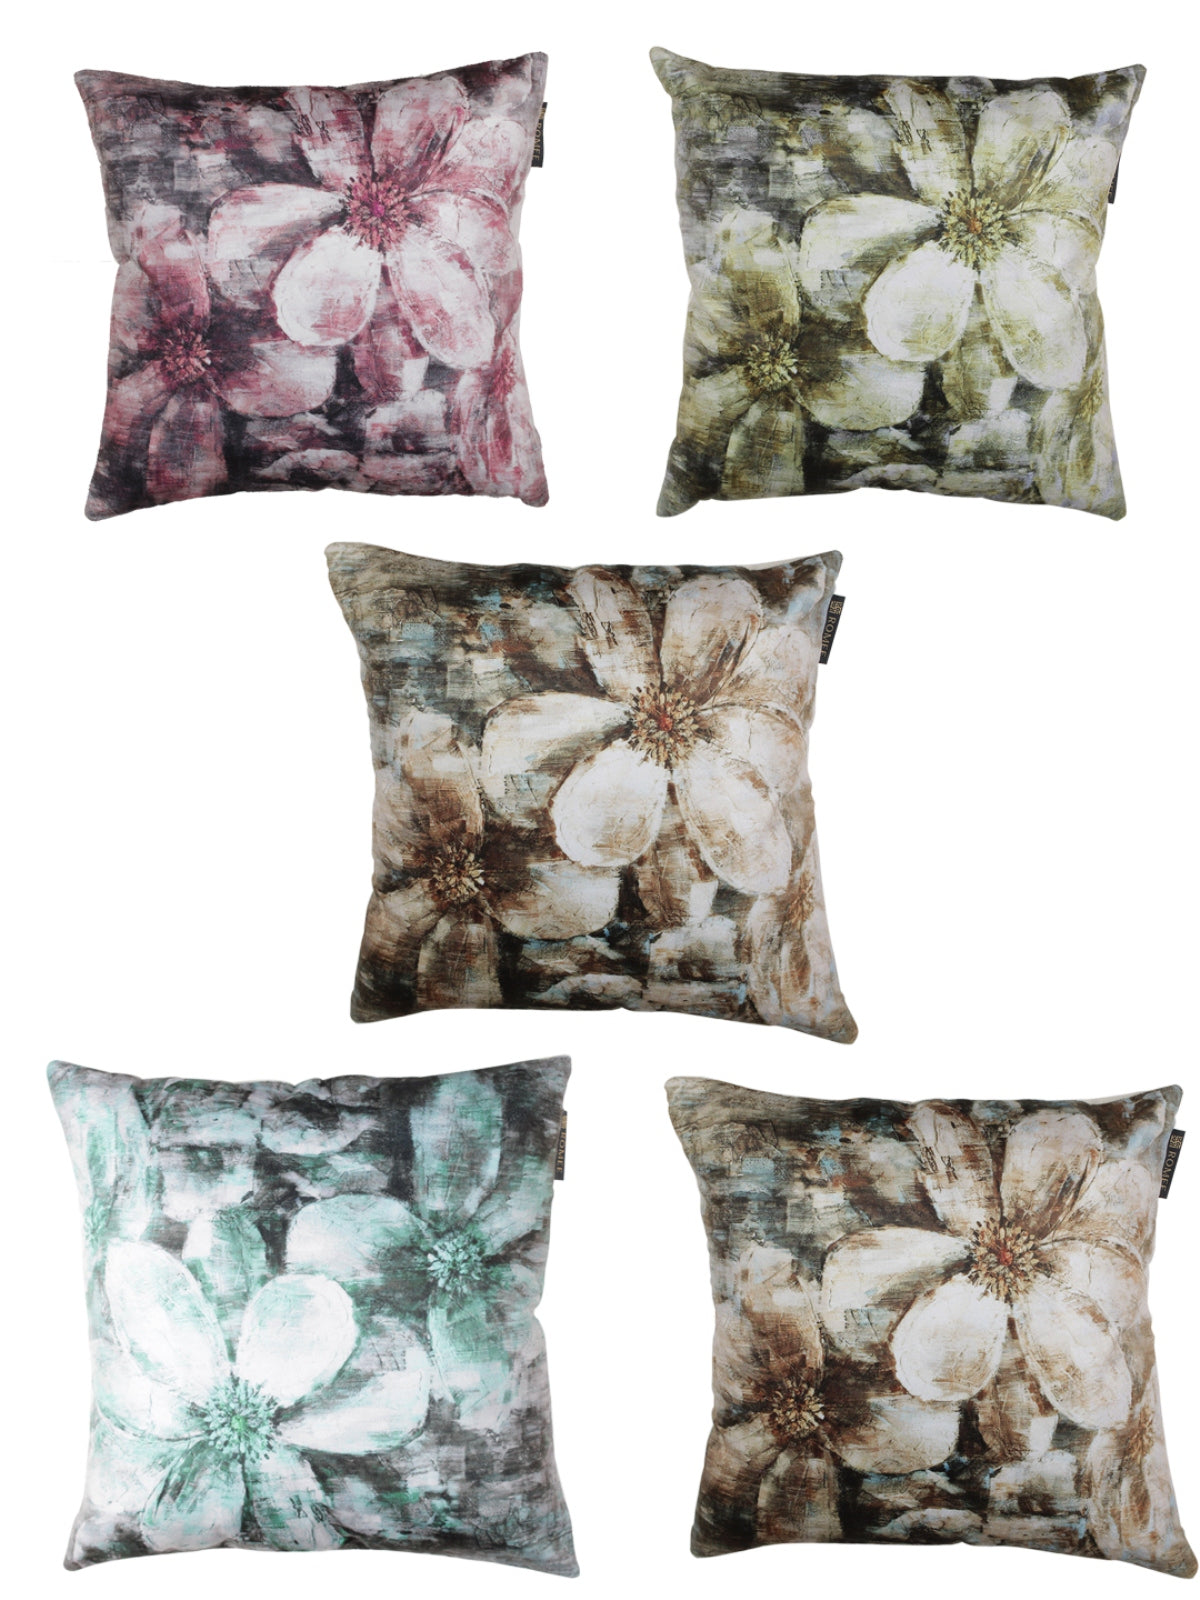 Polyester Velvet Fabric Floral Printed Cushion Cover 16x16 Set of 5 - Multicolor